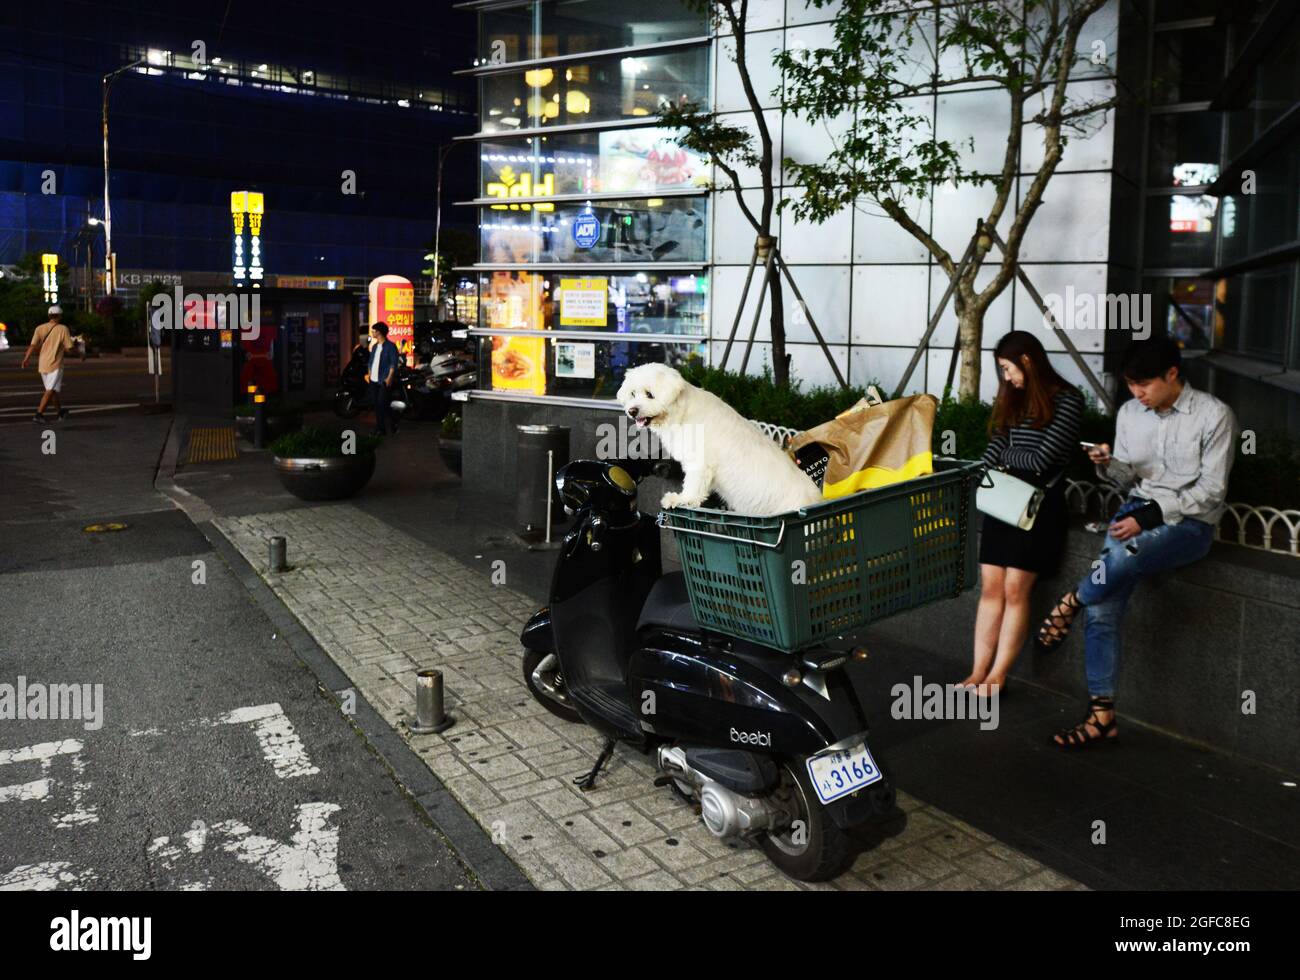 A dog in a basket on a scooter in Seoul, South Korea. Stock Photo